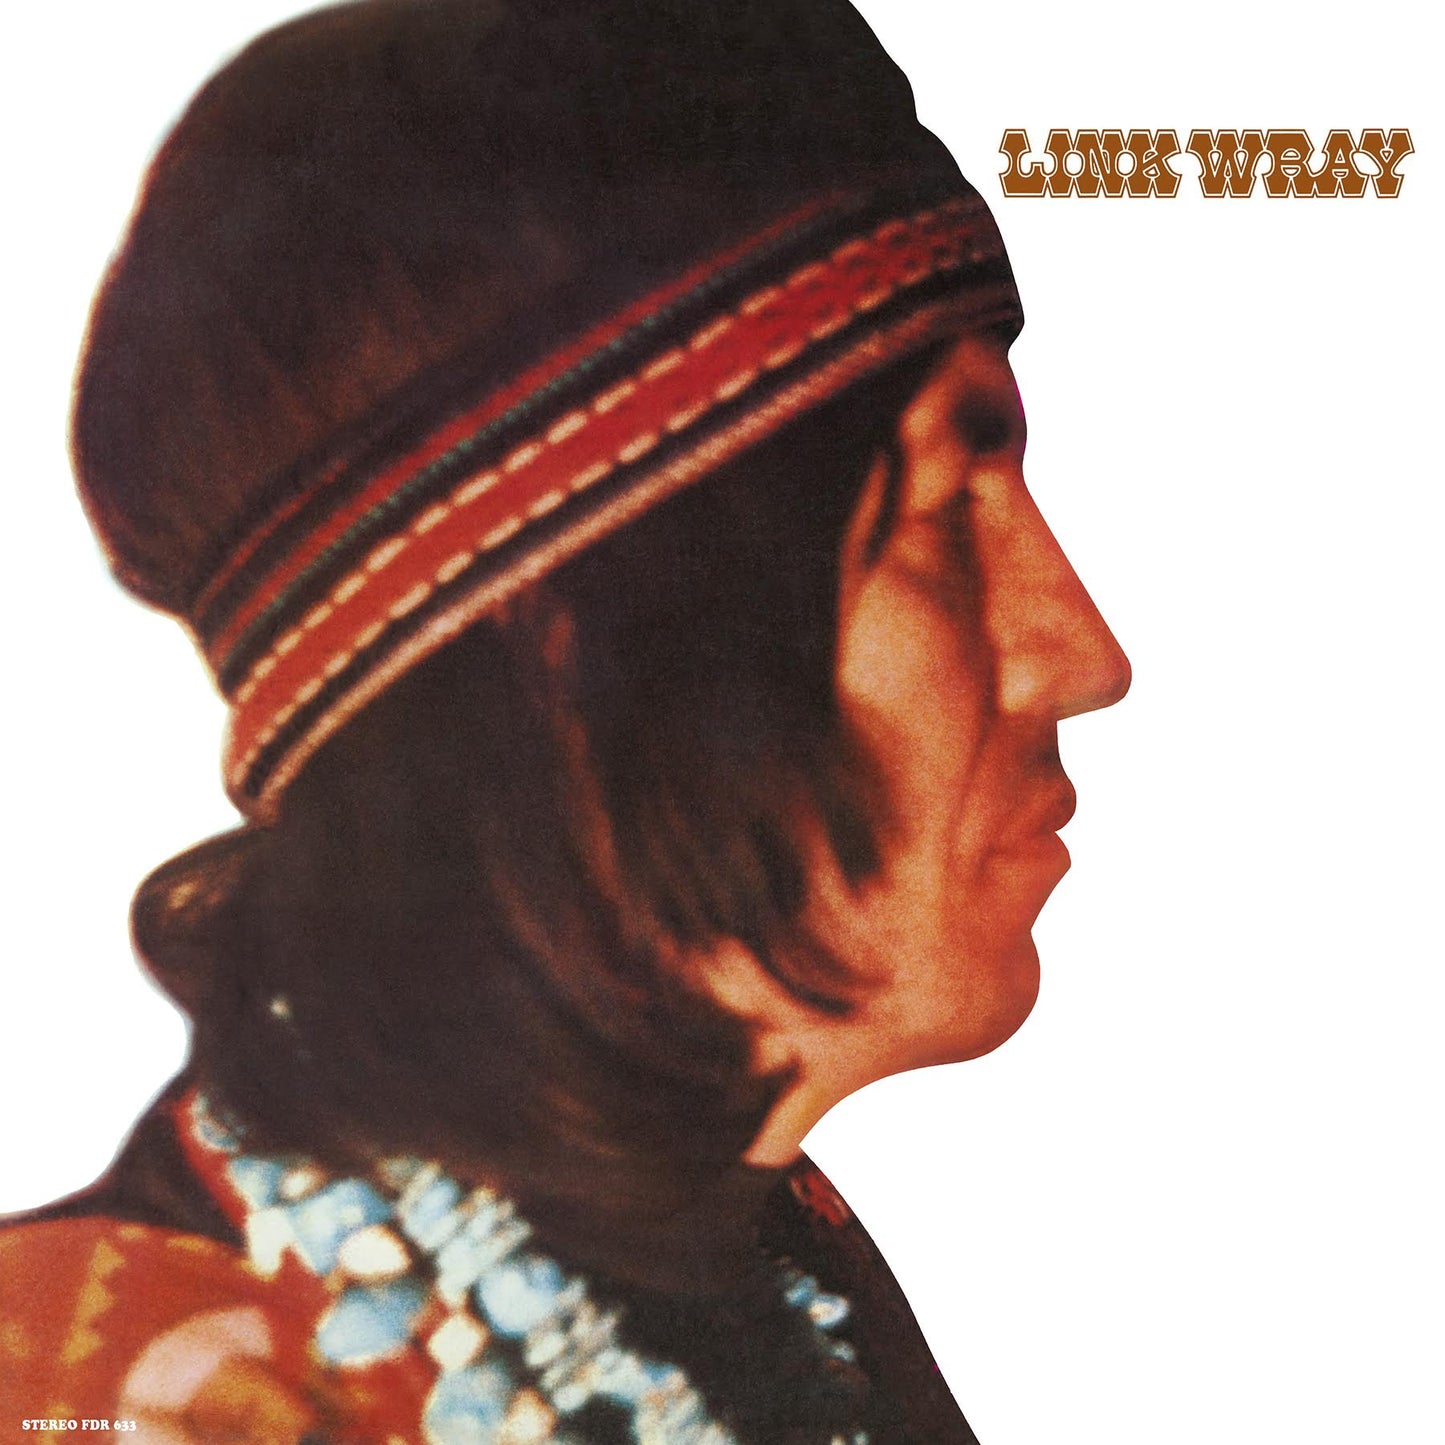 LINK WRAY - "LINK WRAY" LP